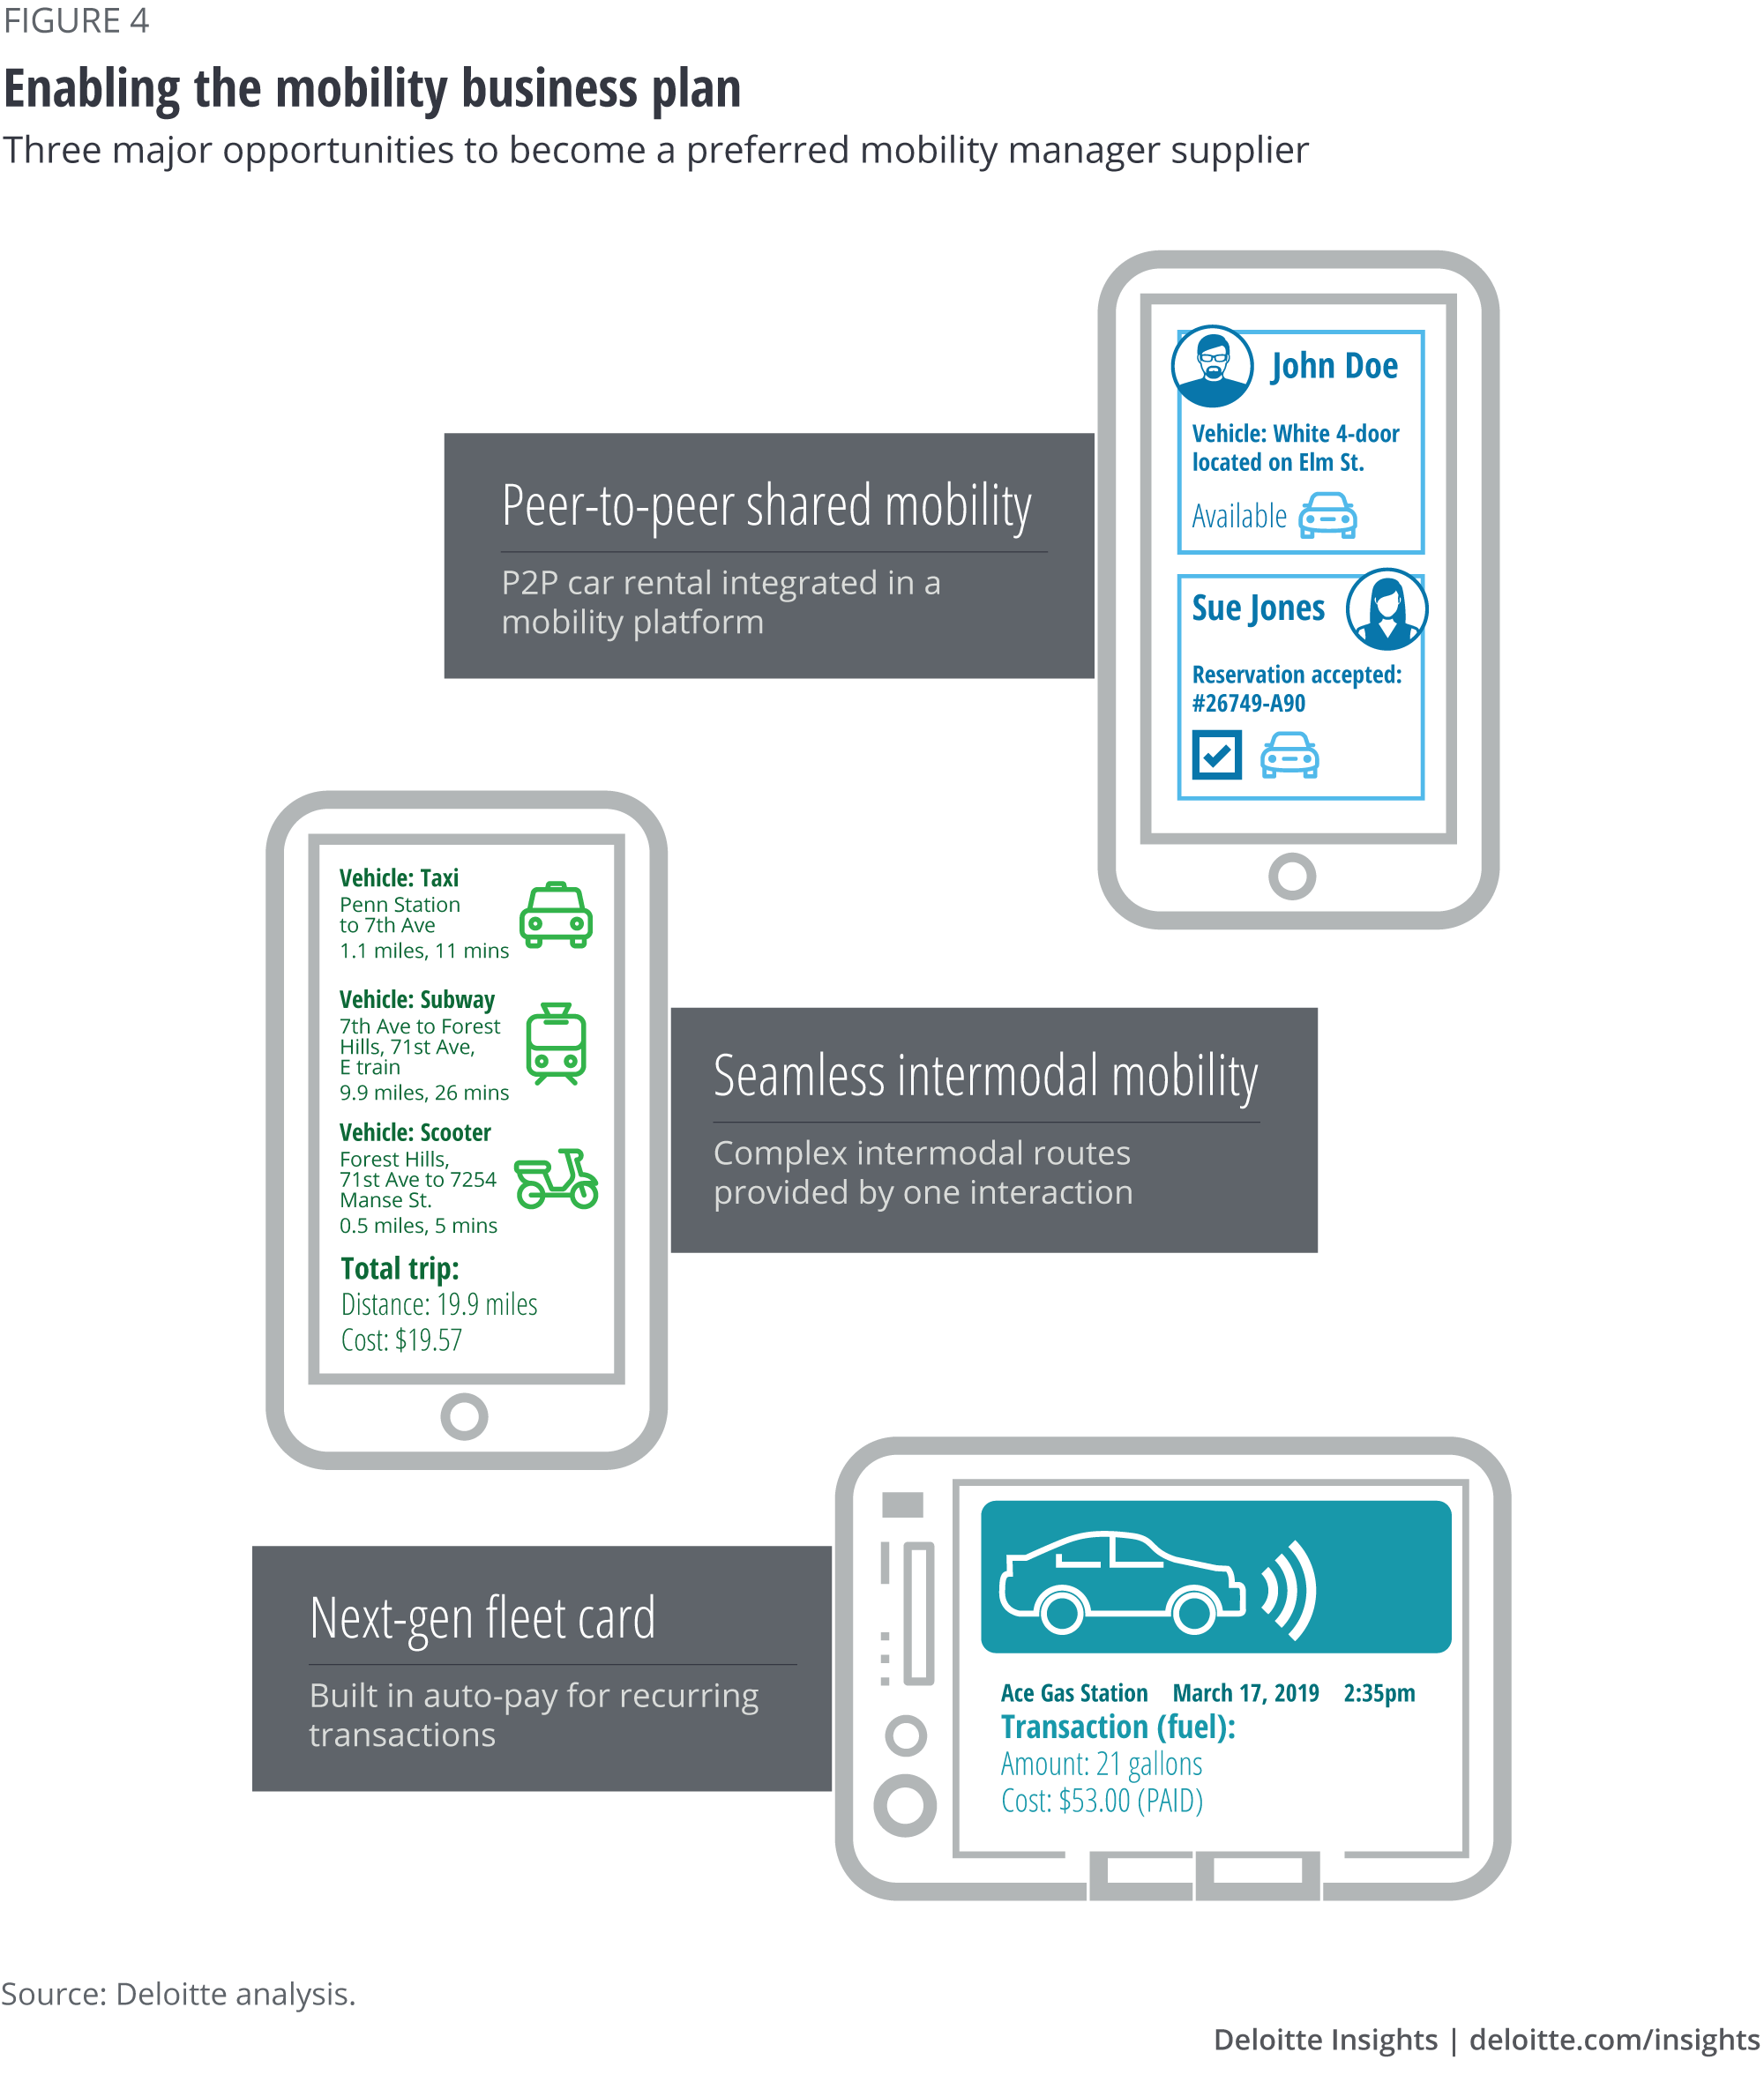 Enabling the mobility business plan